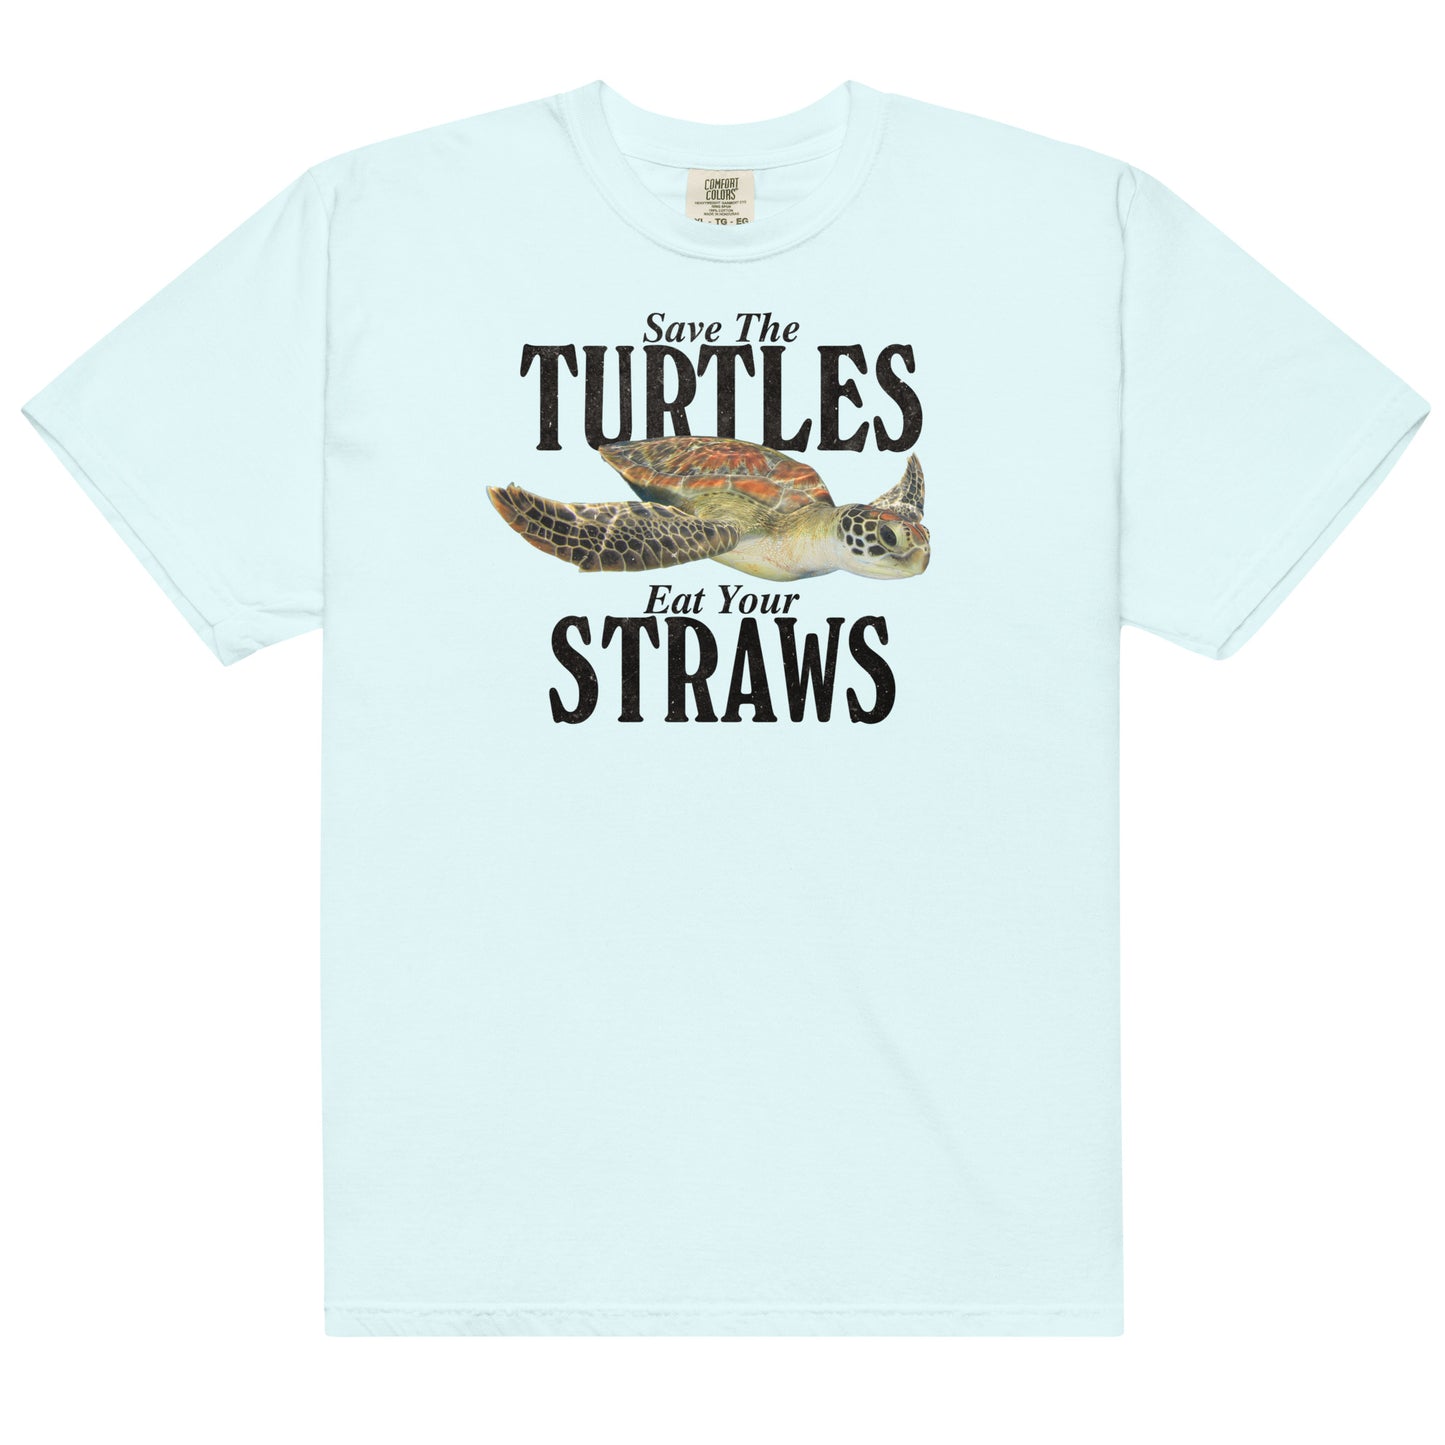 Save the Turtles Eat Your Straws Unisex t-shirt